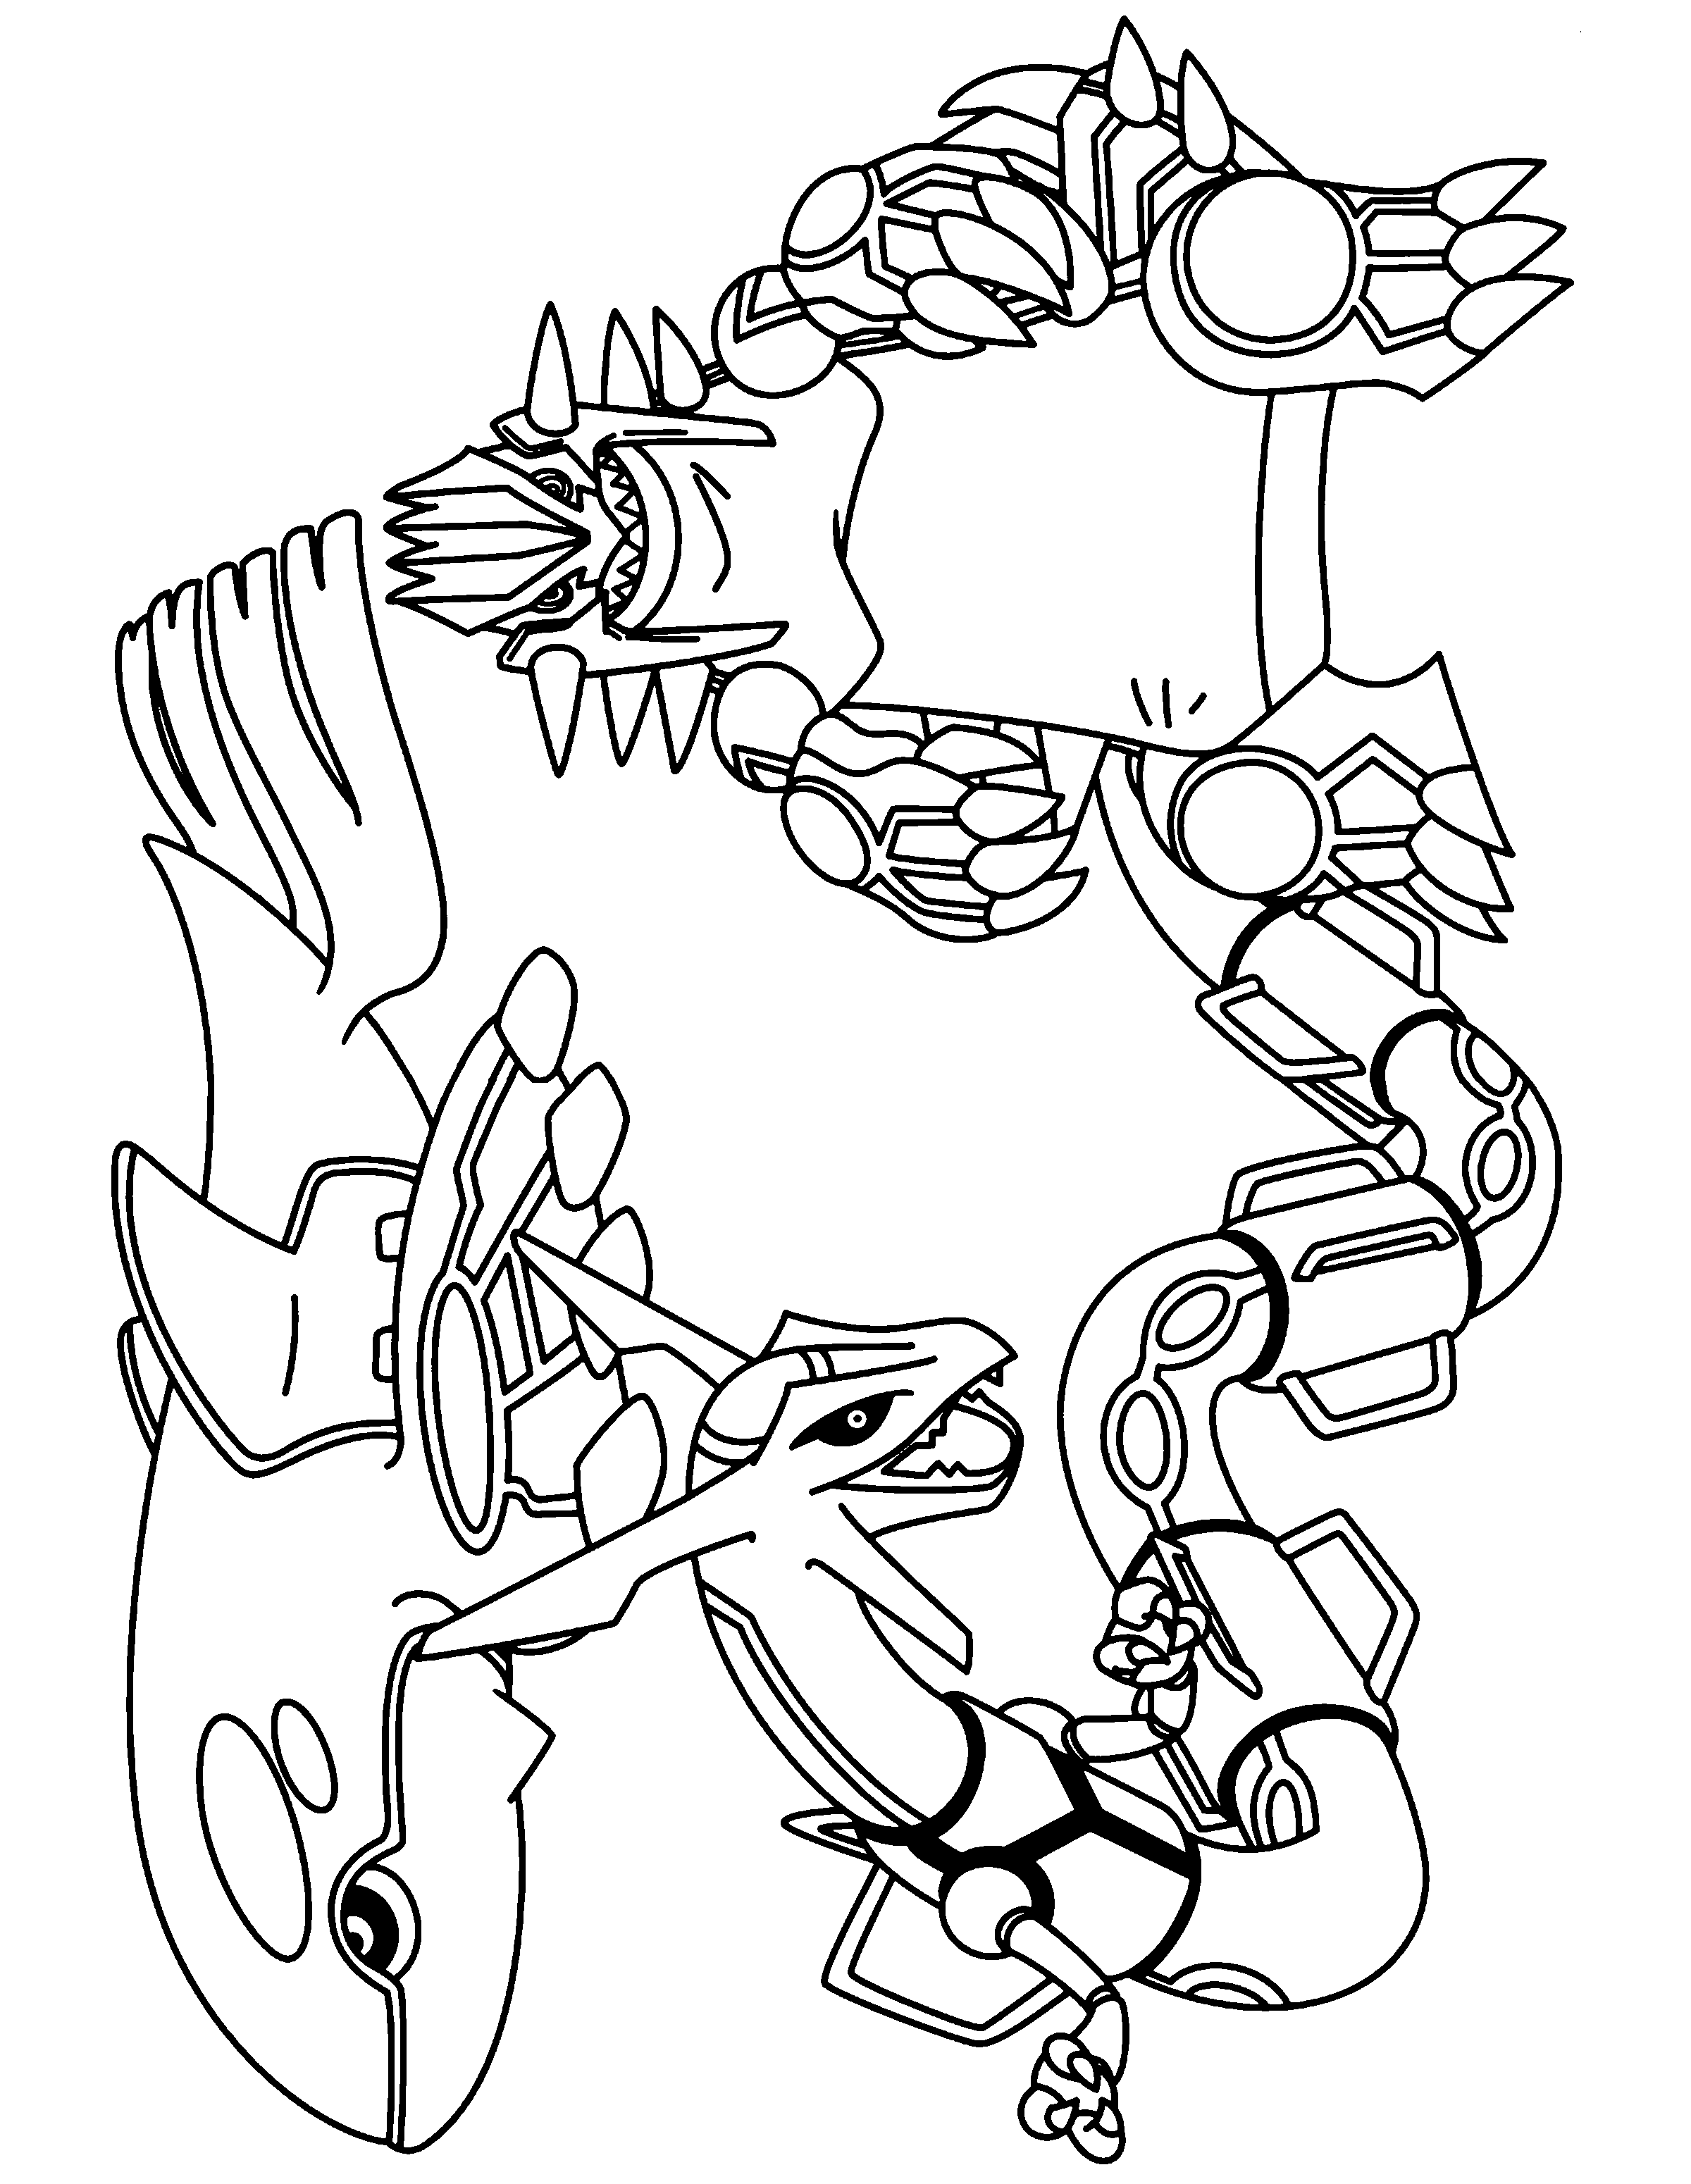 Rayquaza coloring pages